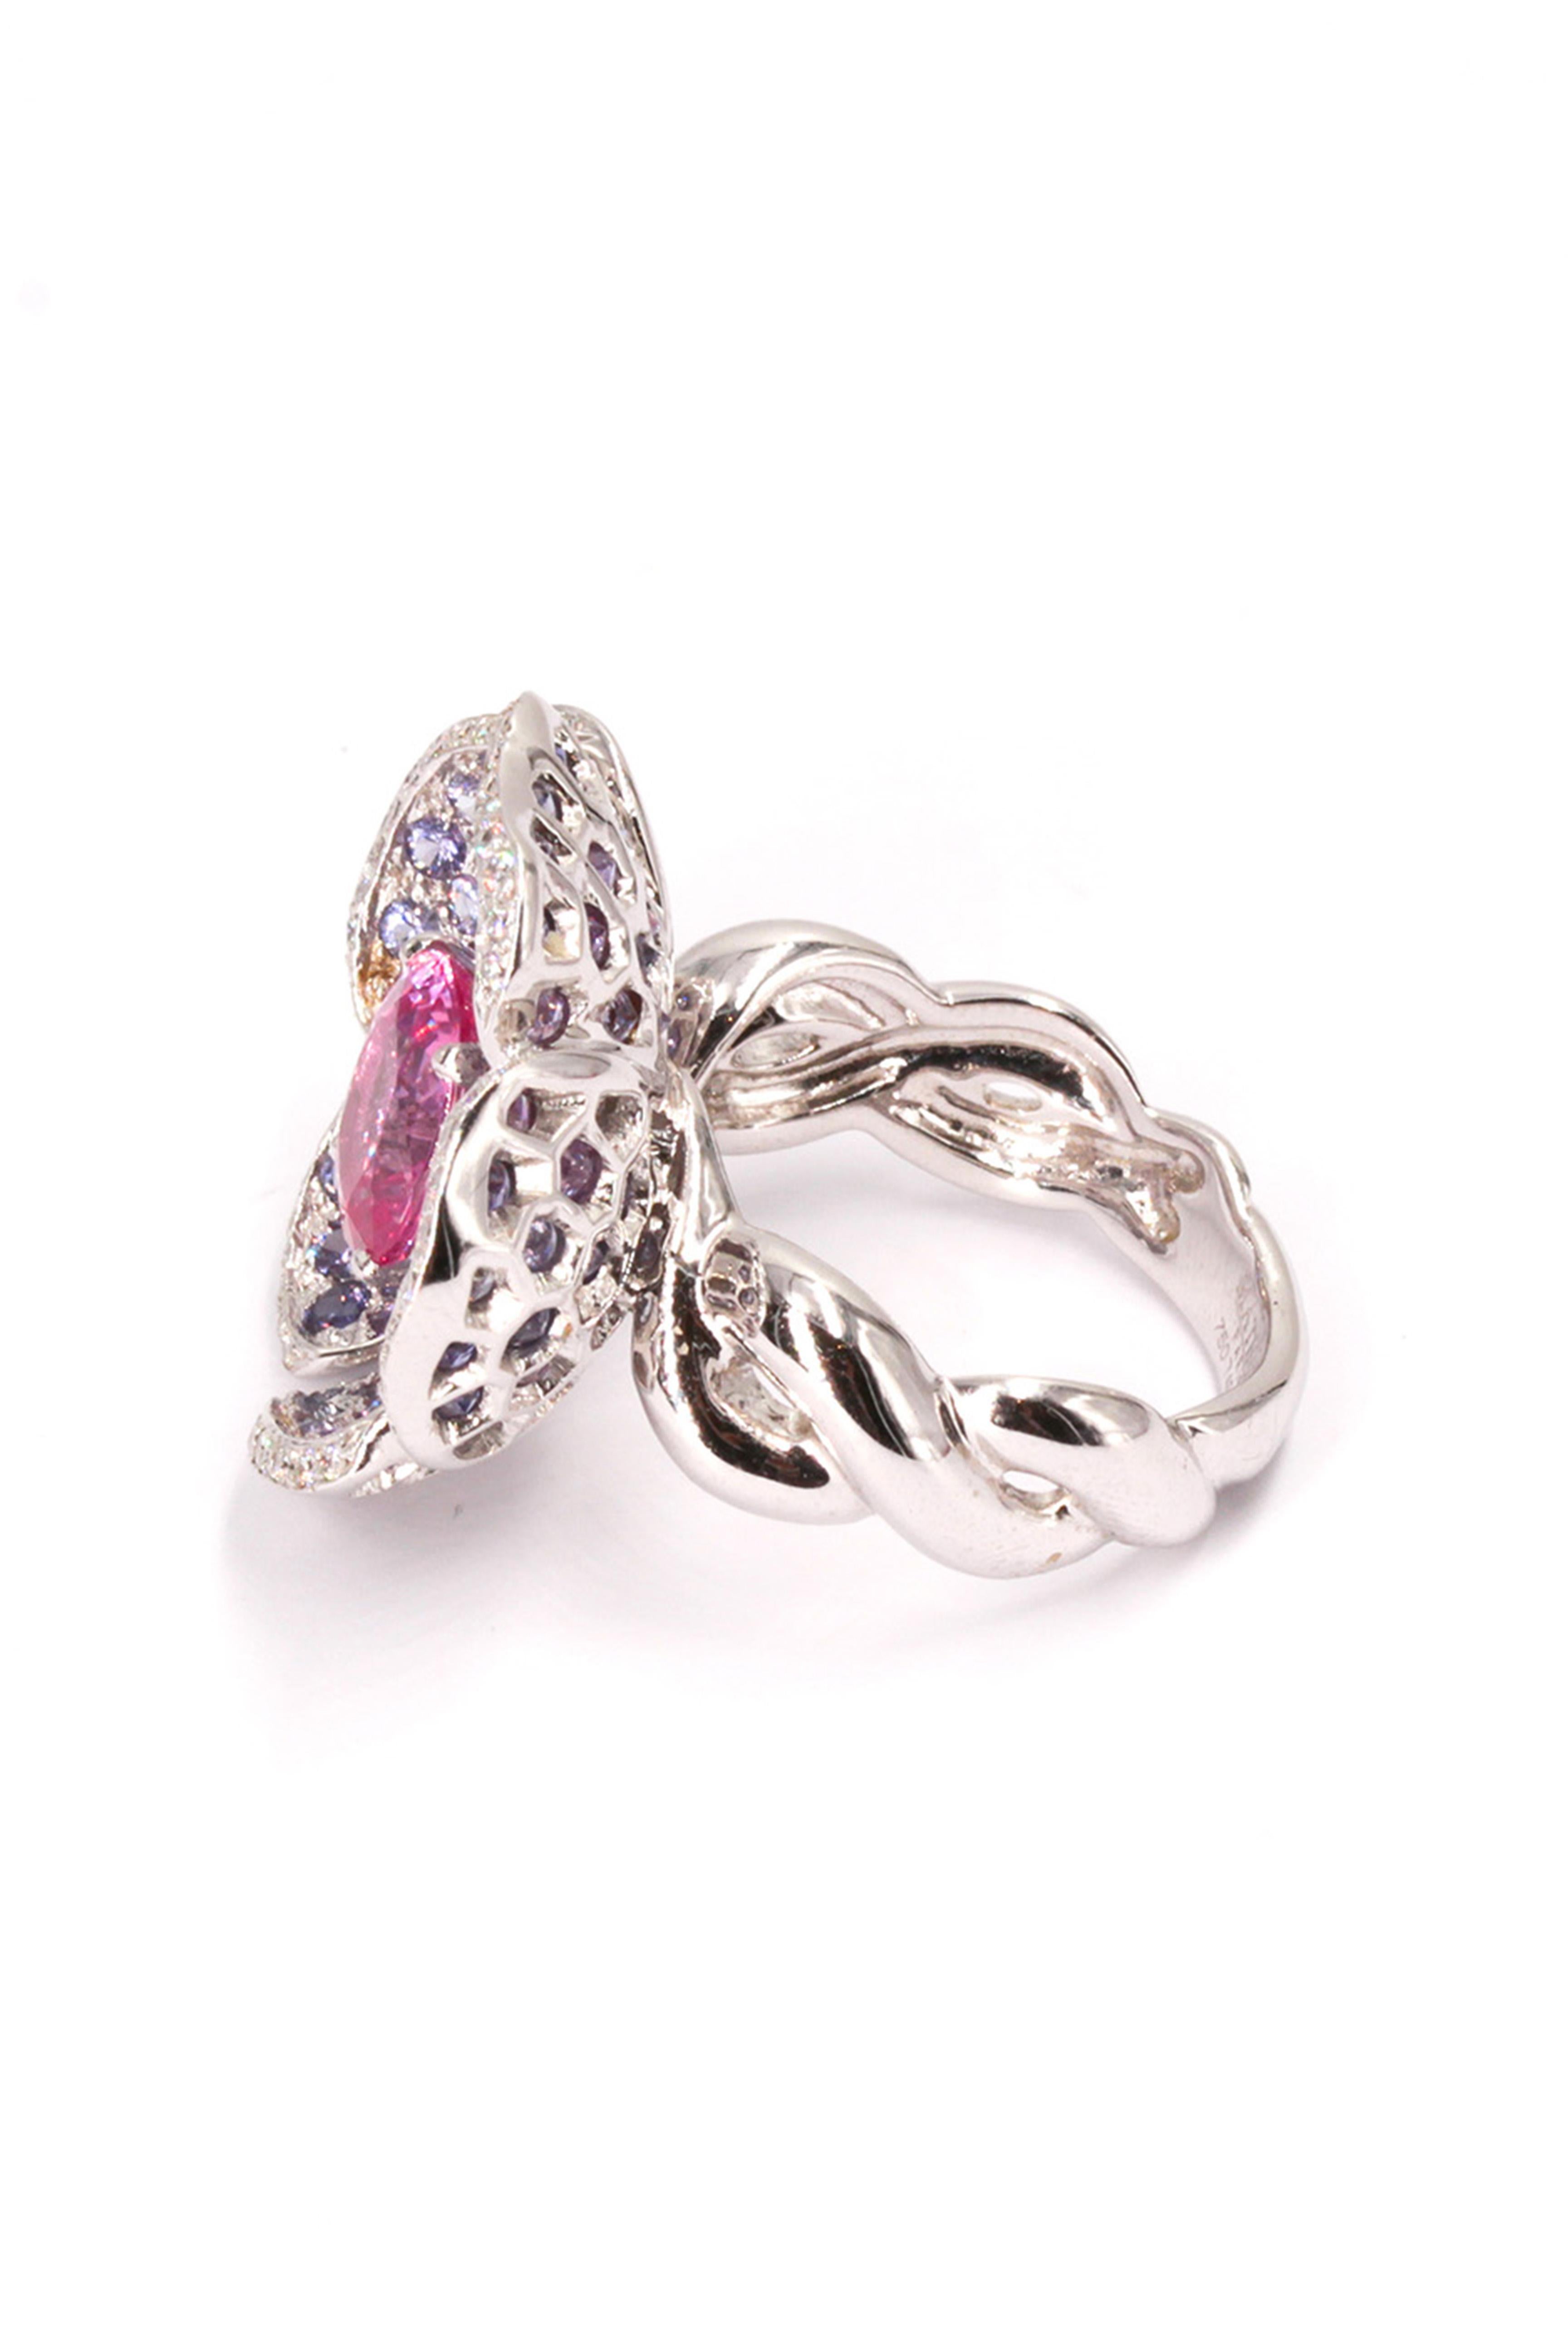 Anémone ring by Mathon Paris at Second Petale Gallery

Explore an enchanted universe and witness the vivid colors gemstones with the Anémone ring in purple and pink sapphires, diamonds and white gold.

About the Gemstones : 
Diamonds (0,25